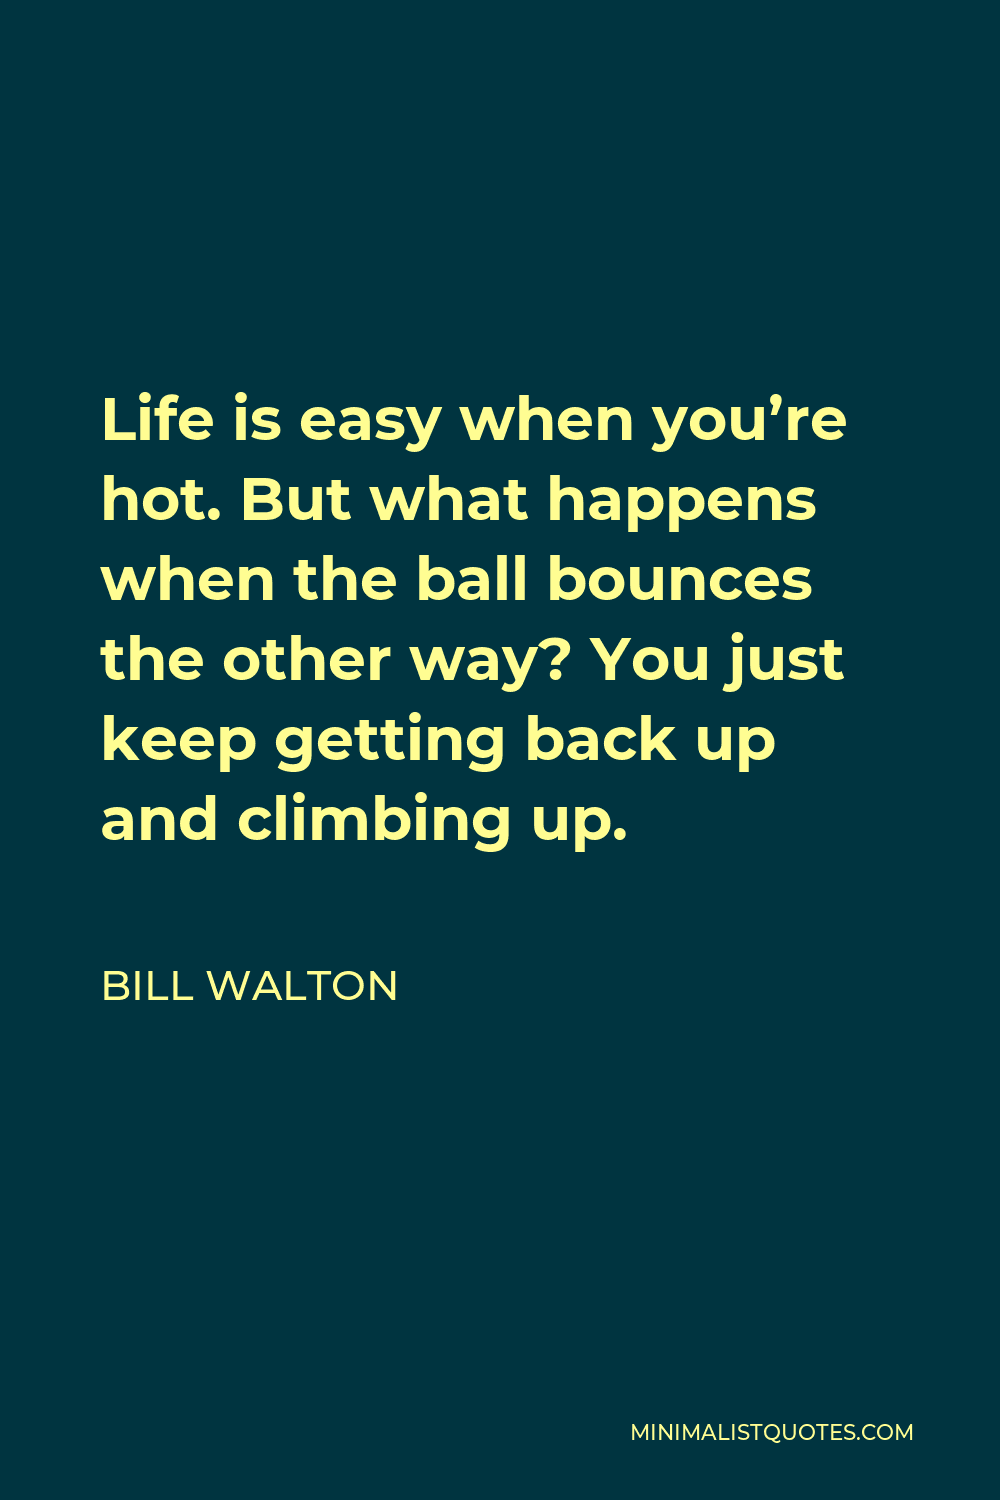 Bill Walton Quote - Life is easy when you’re hot. But what happens when the ball bounces the other way? You just keep getting back up and climbing up.